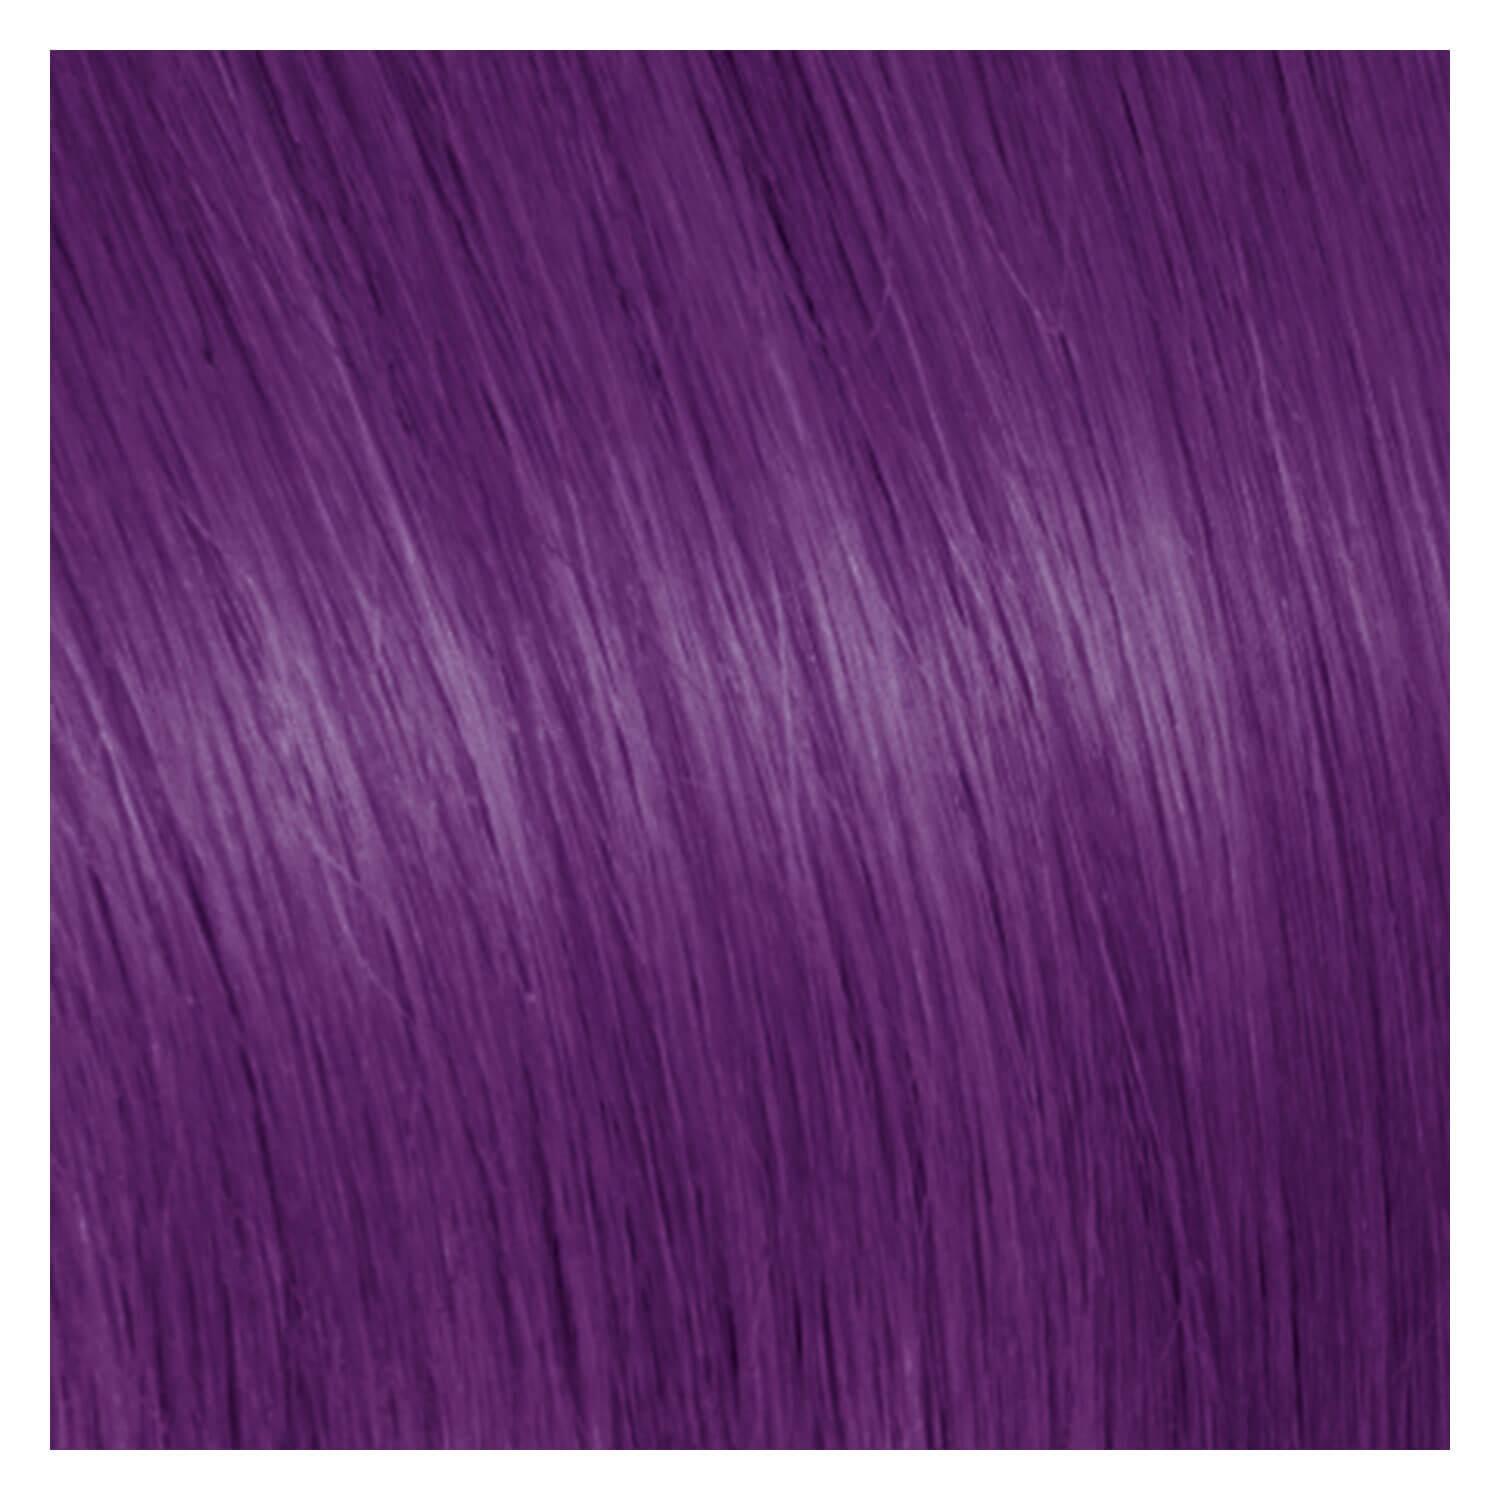 SHE Tape In-System Hair Extensions Straight - Blauviolett 55/60cm